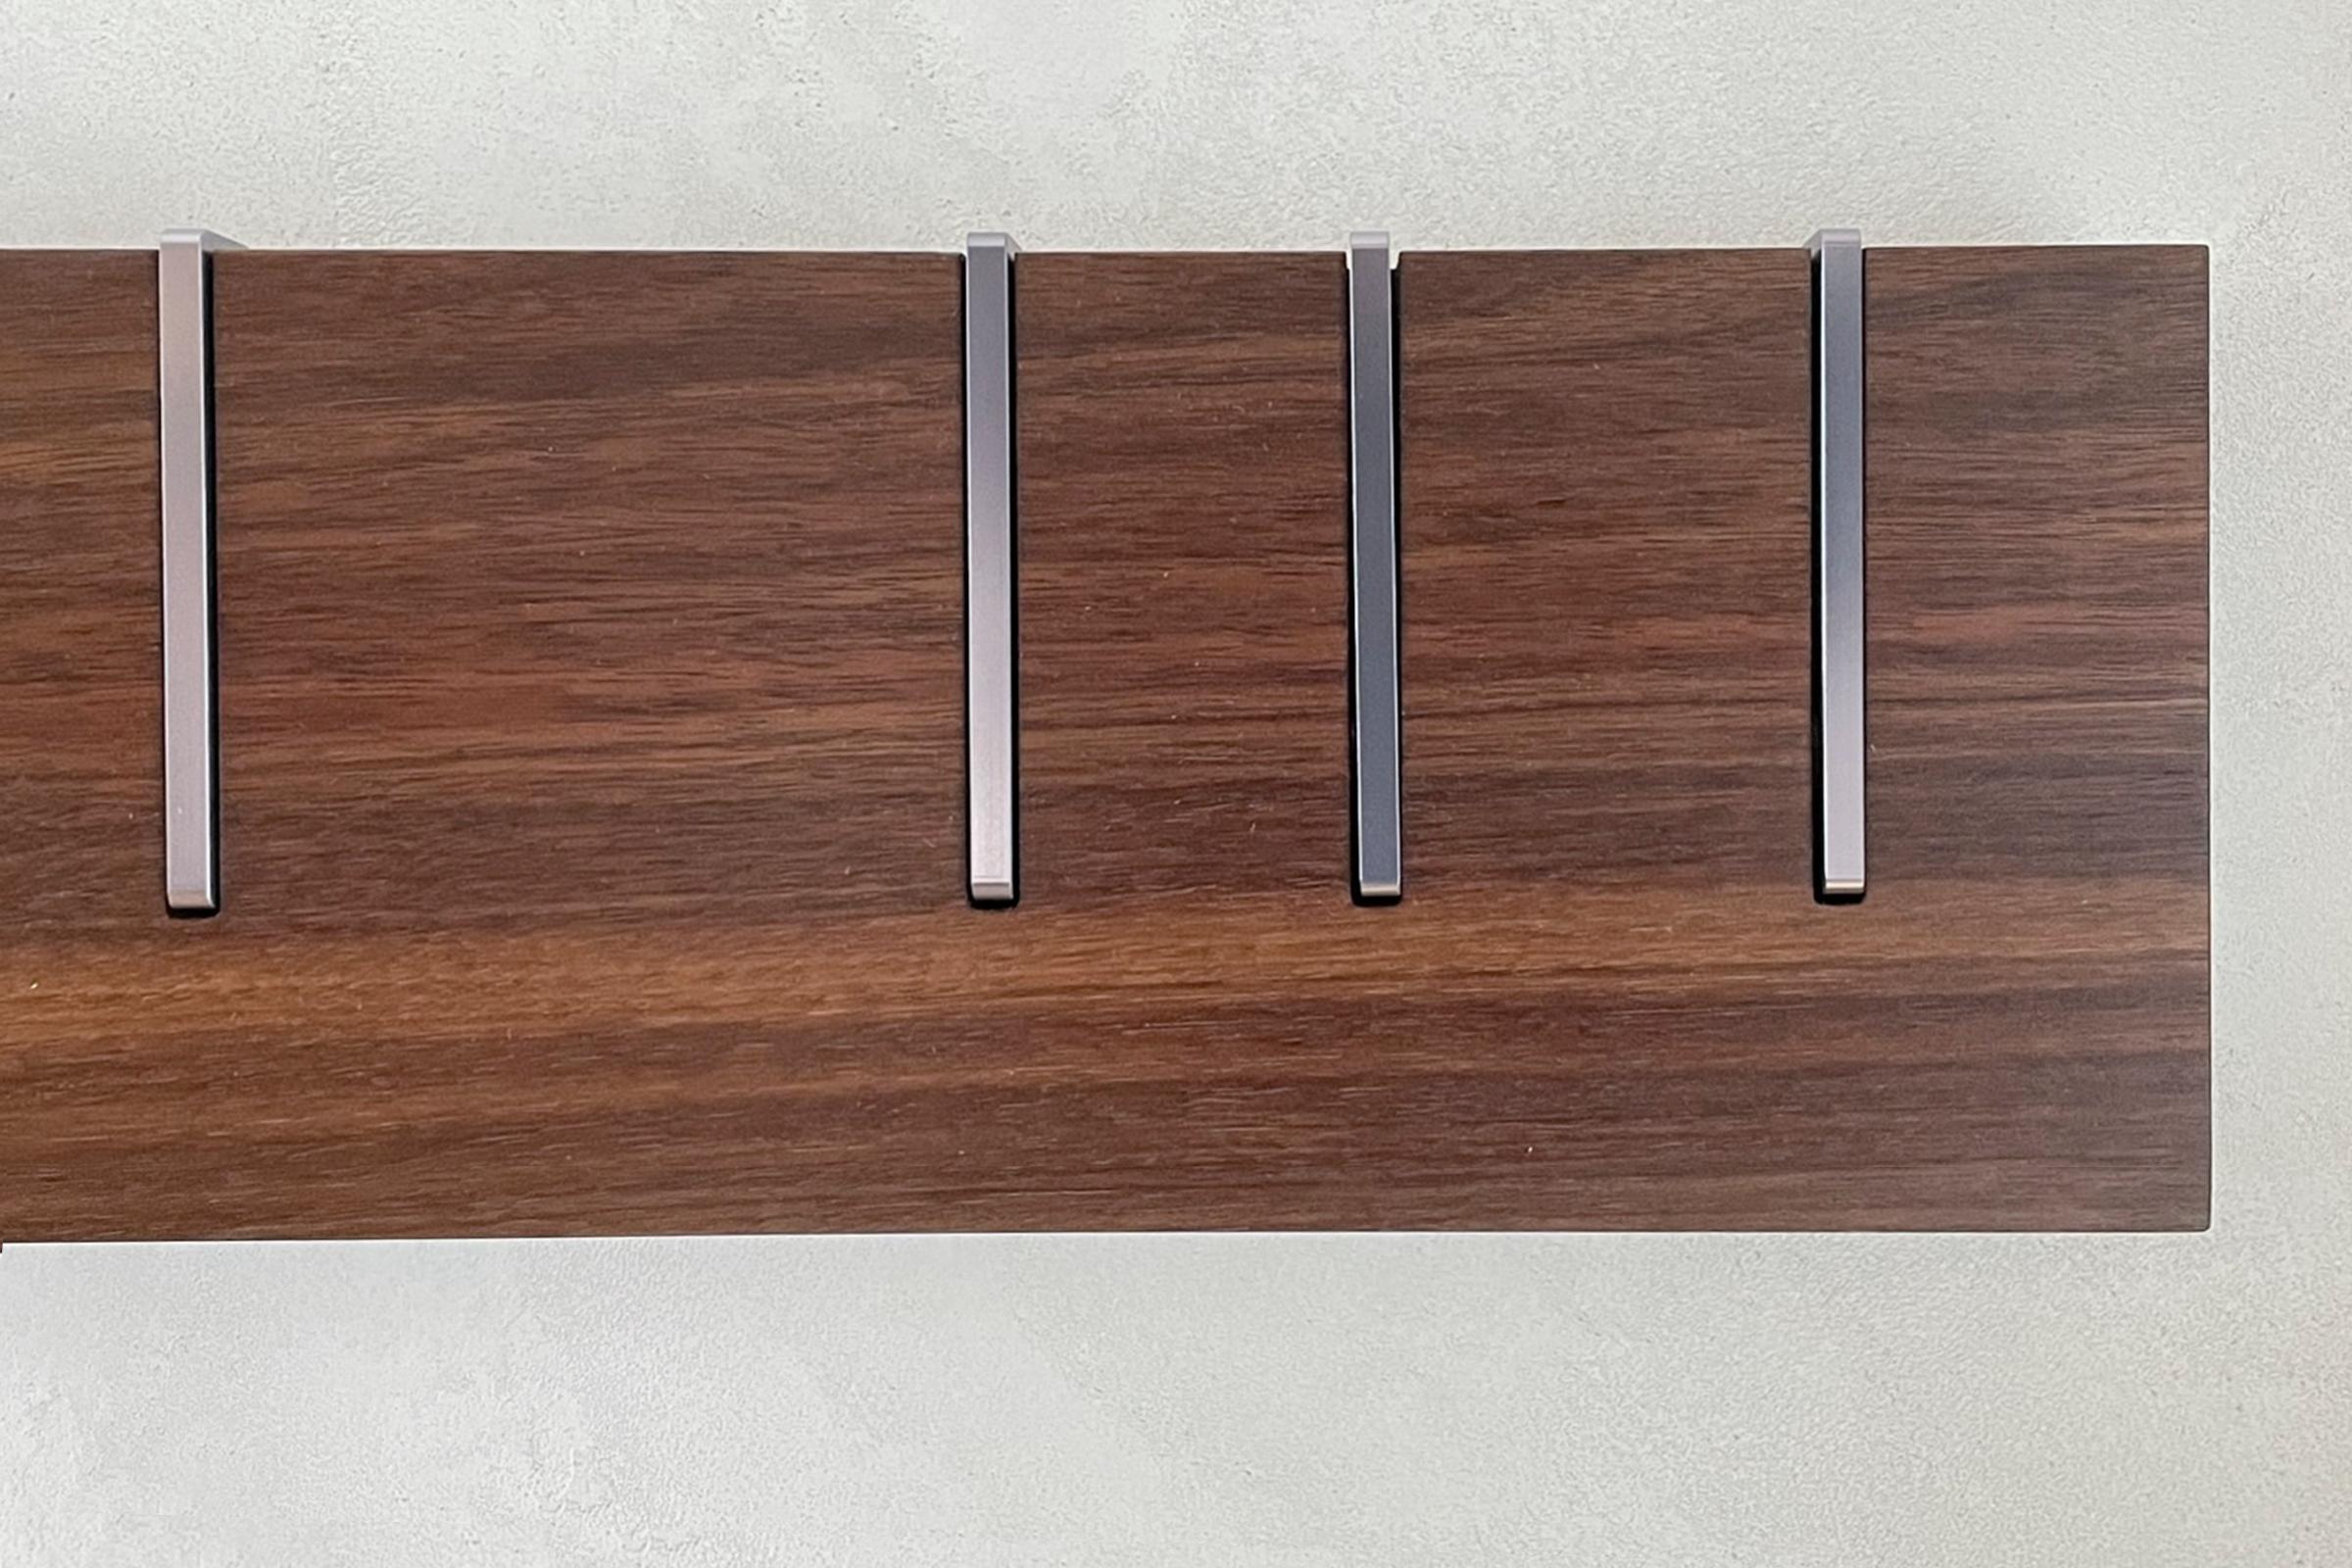 Symbol X is an ongoing exploration into rendering our iconic symbol coat rack in new materials and finishes. With limited, small batch productions each unit is one of a kind. The photos on this page are of the exact coat rack you will receive,